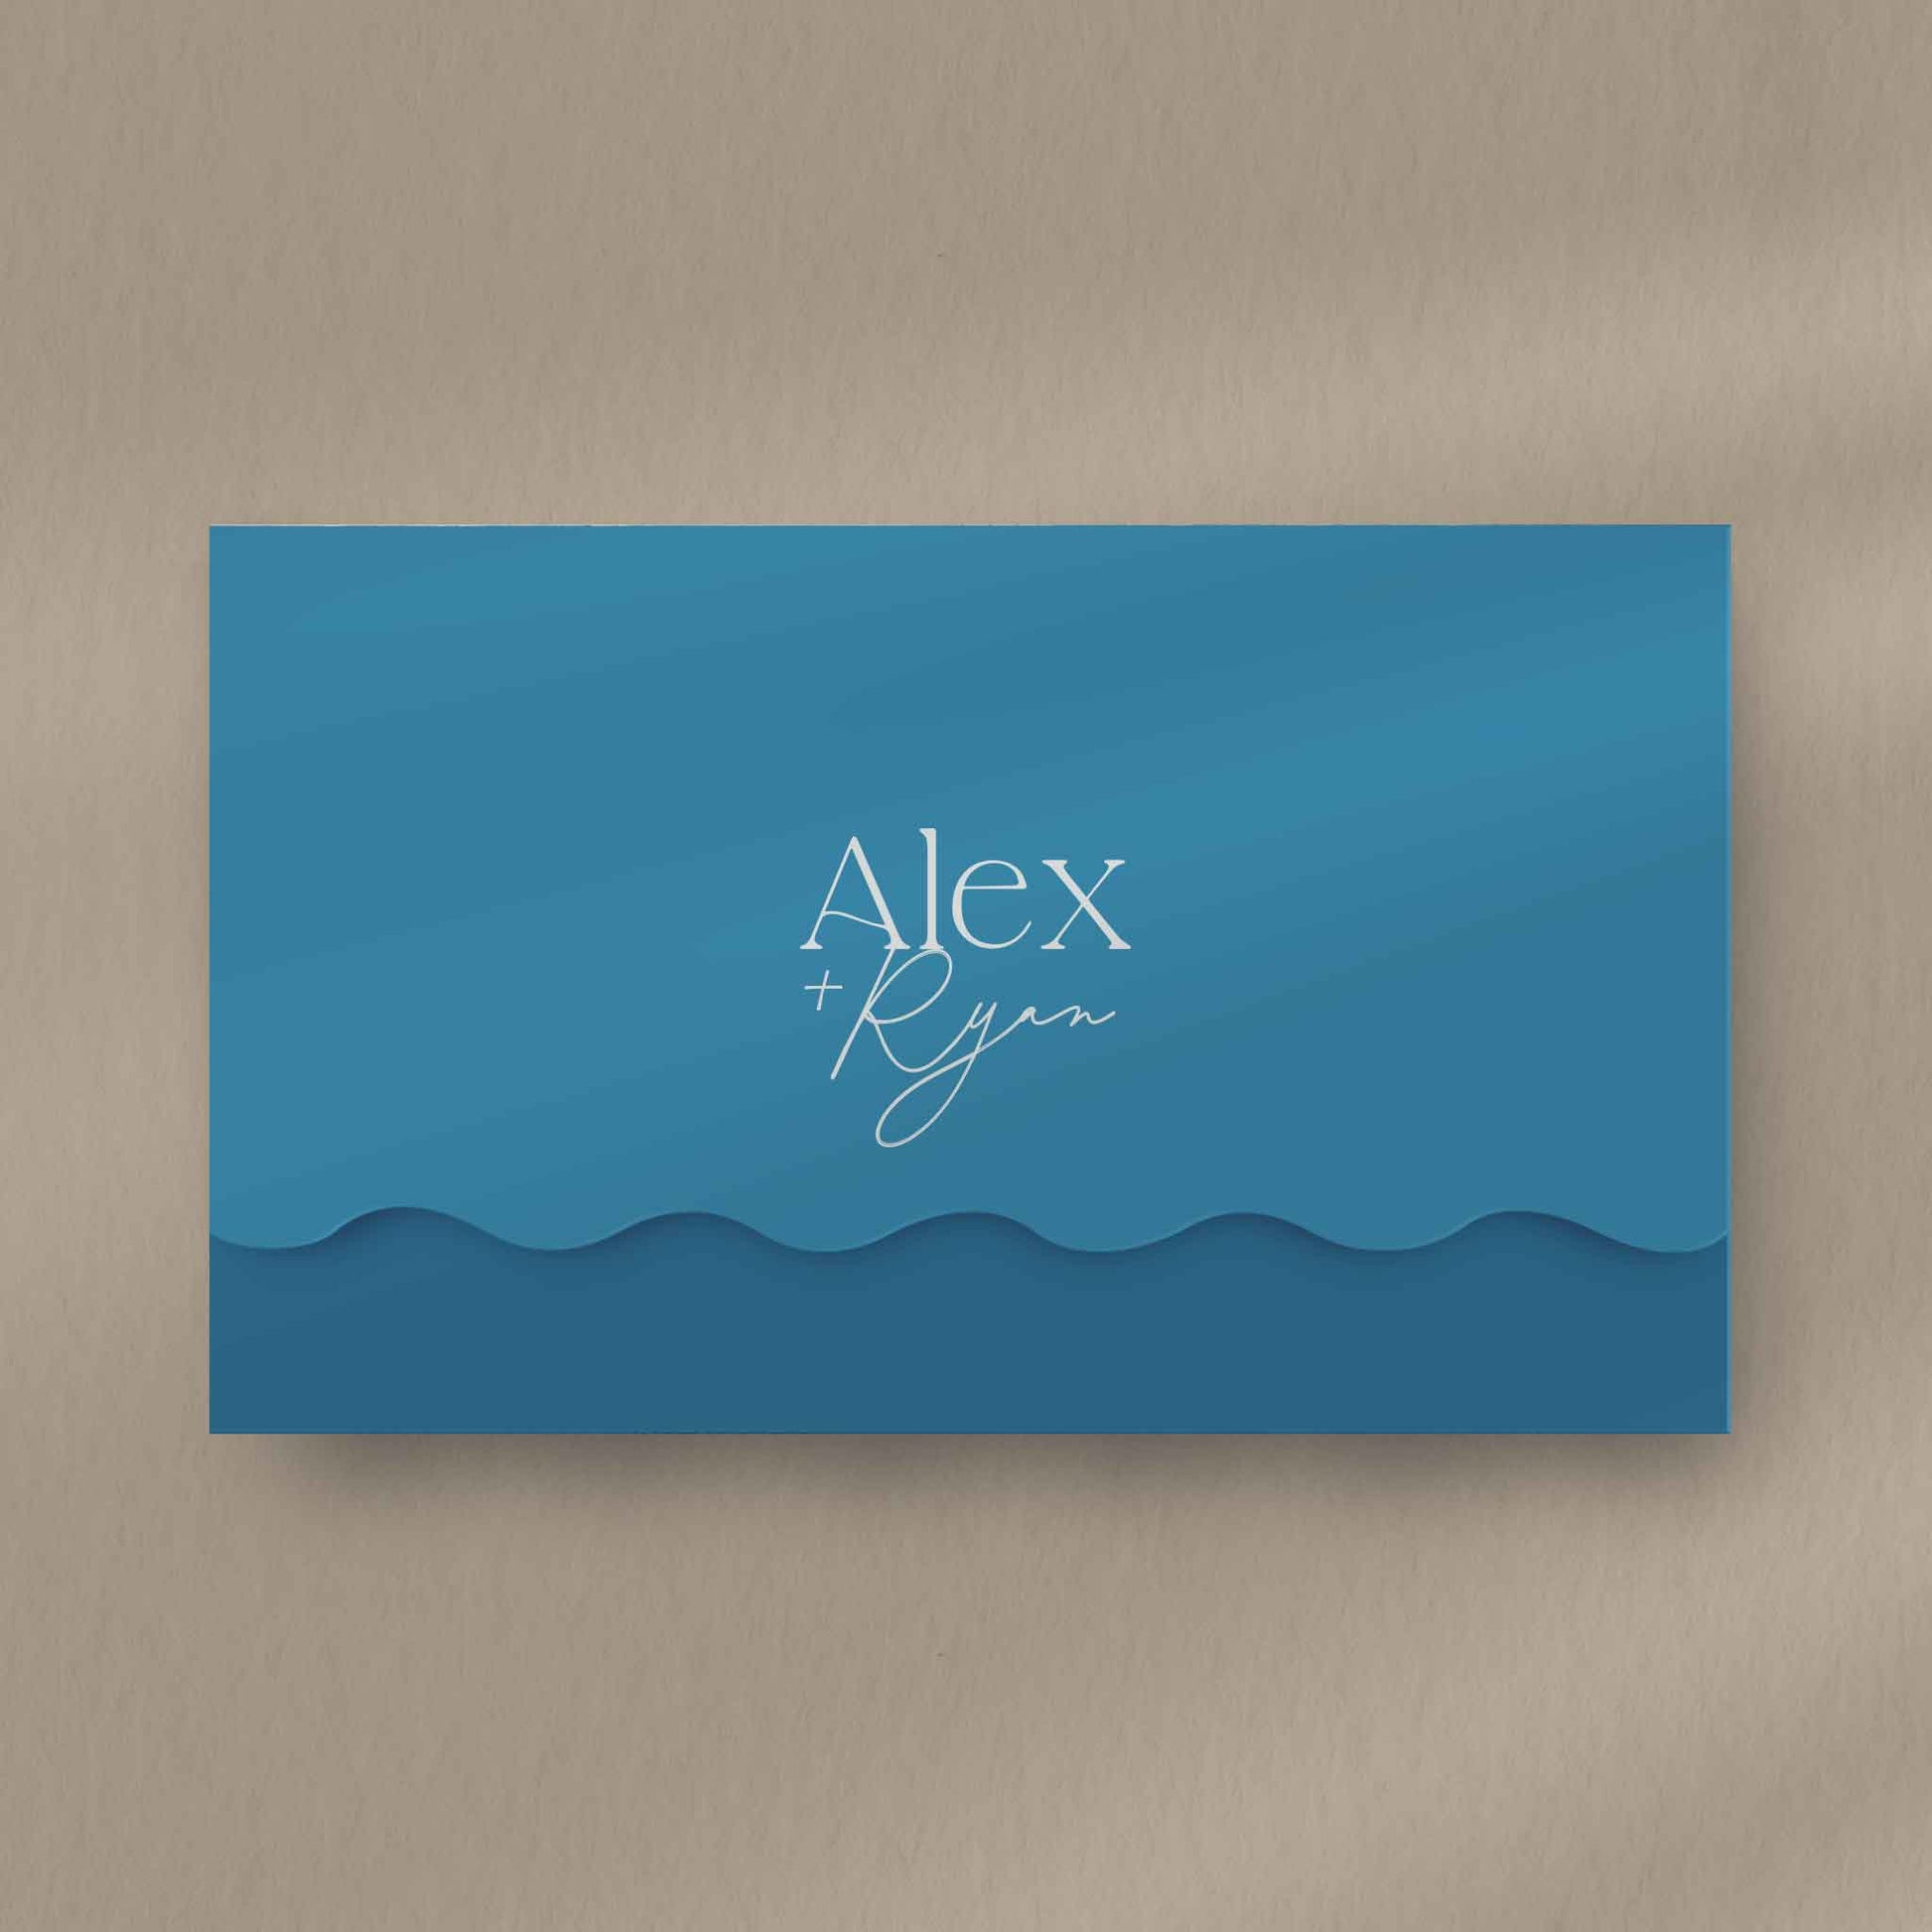 Alex Scallop Envelope Invite  Ivy and Gold Wedding Stationery   